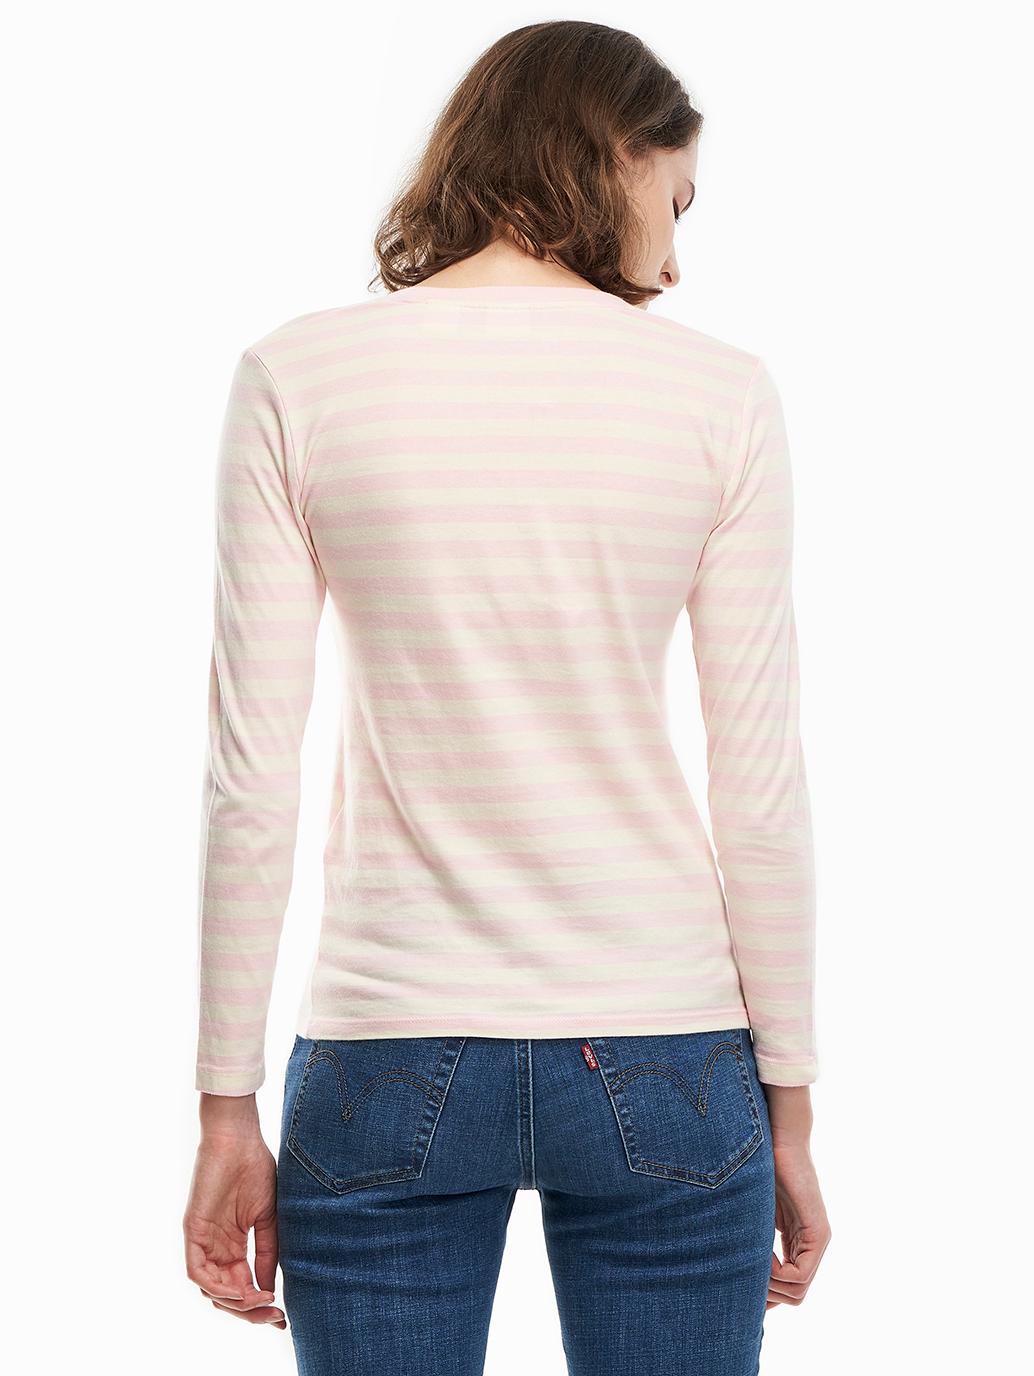 levis malaysia womens long sleeve perfect tee A15620000 02 Back